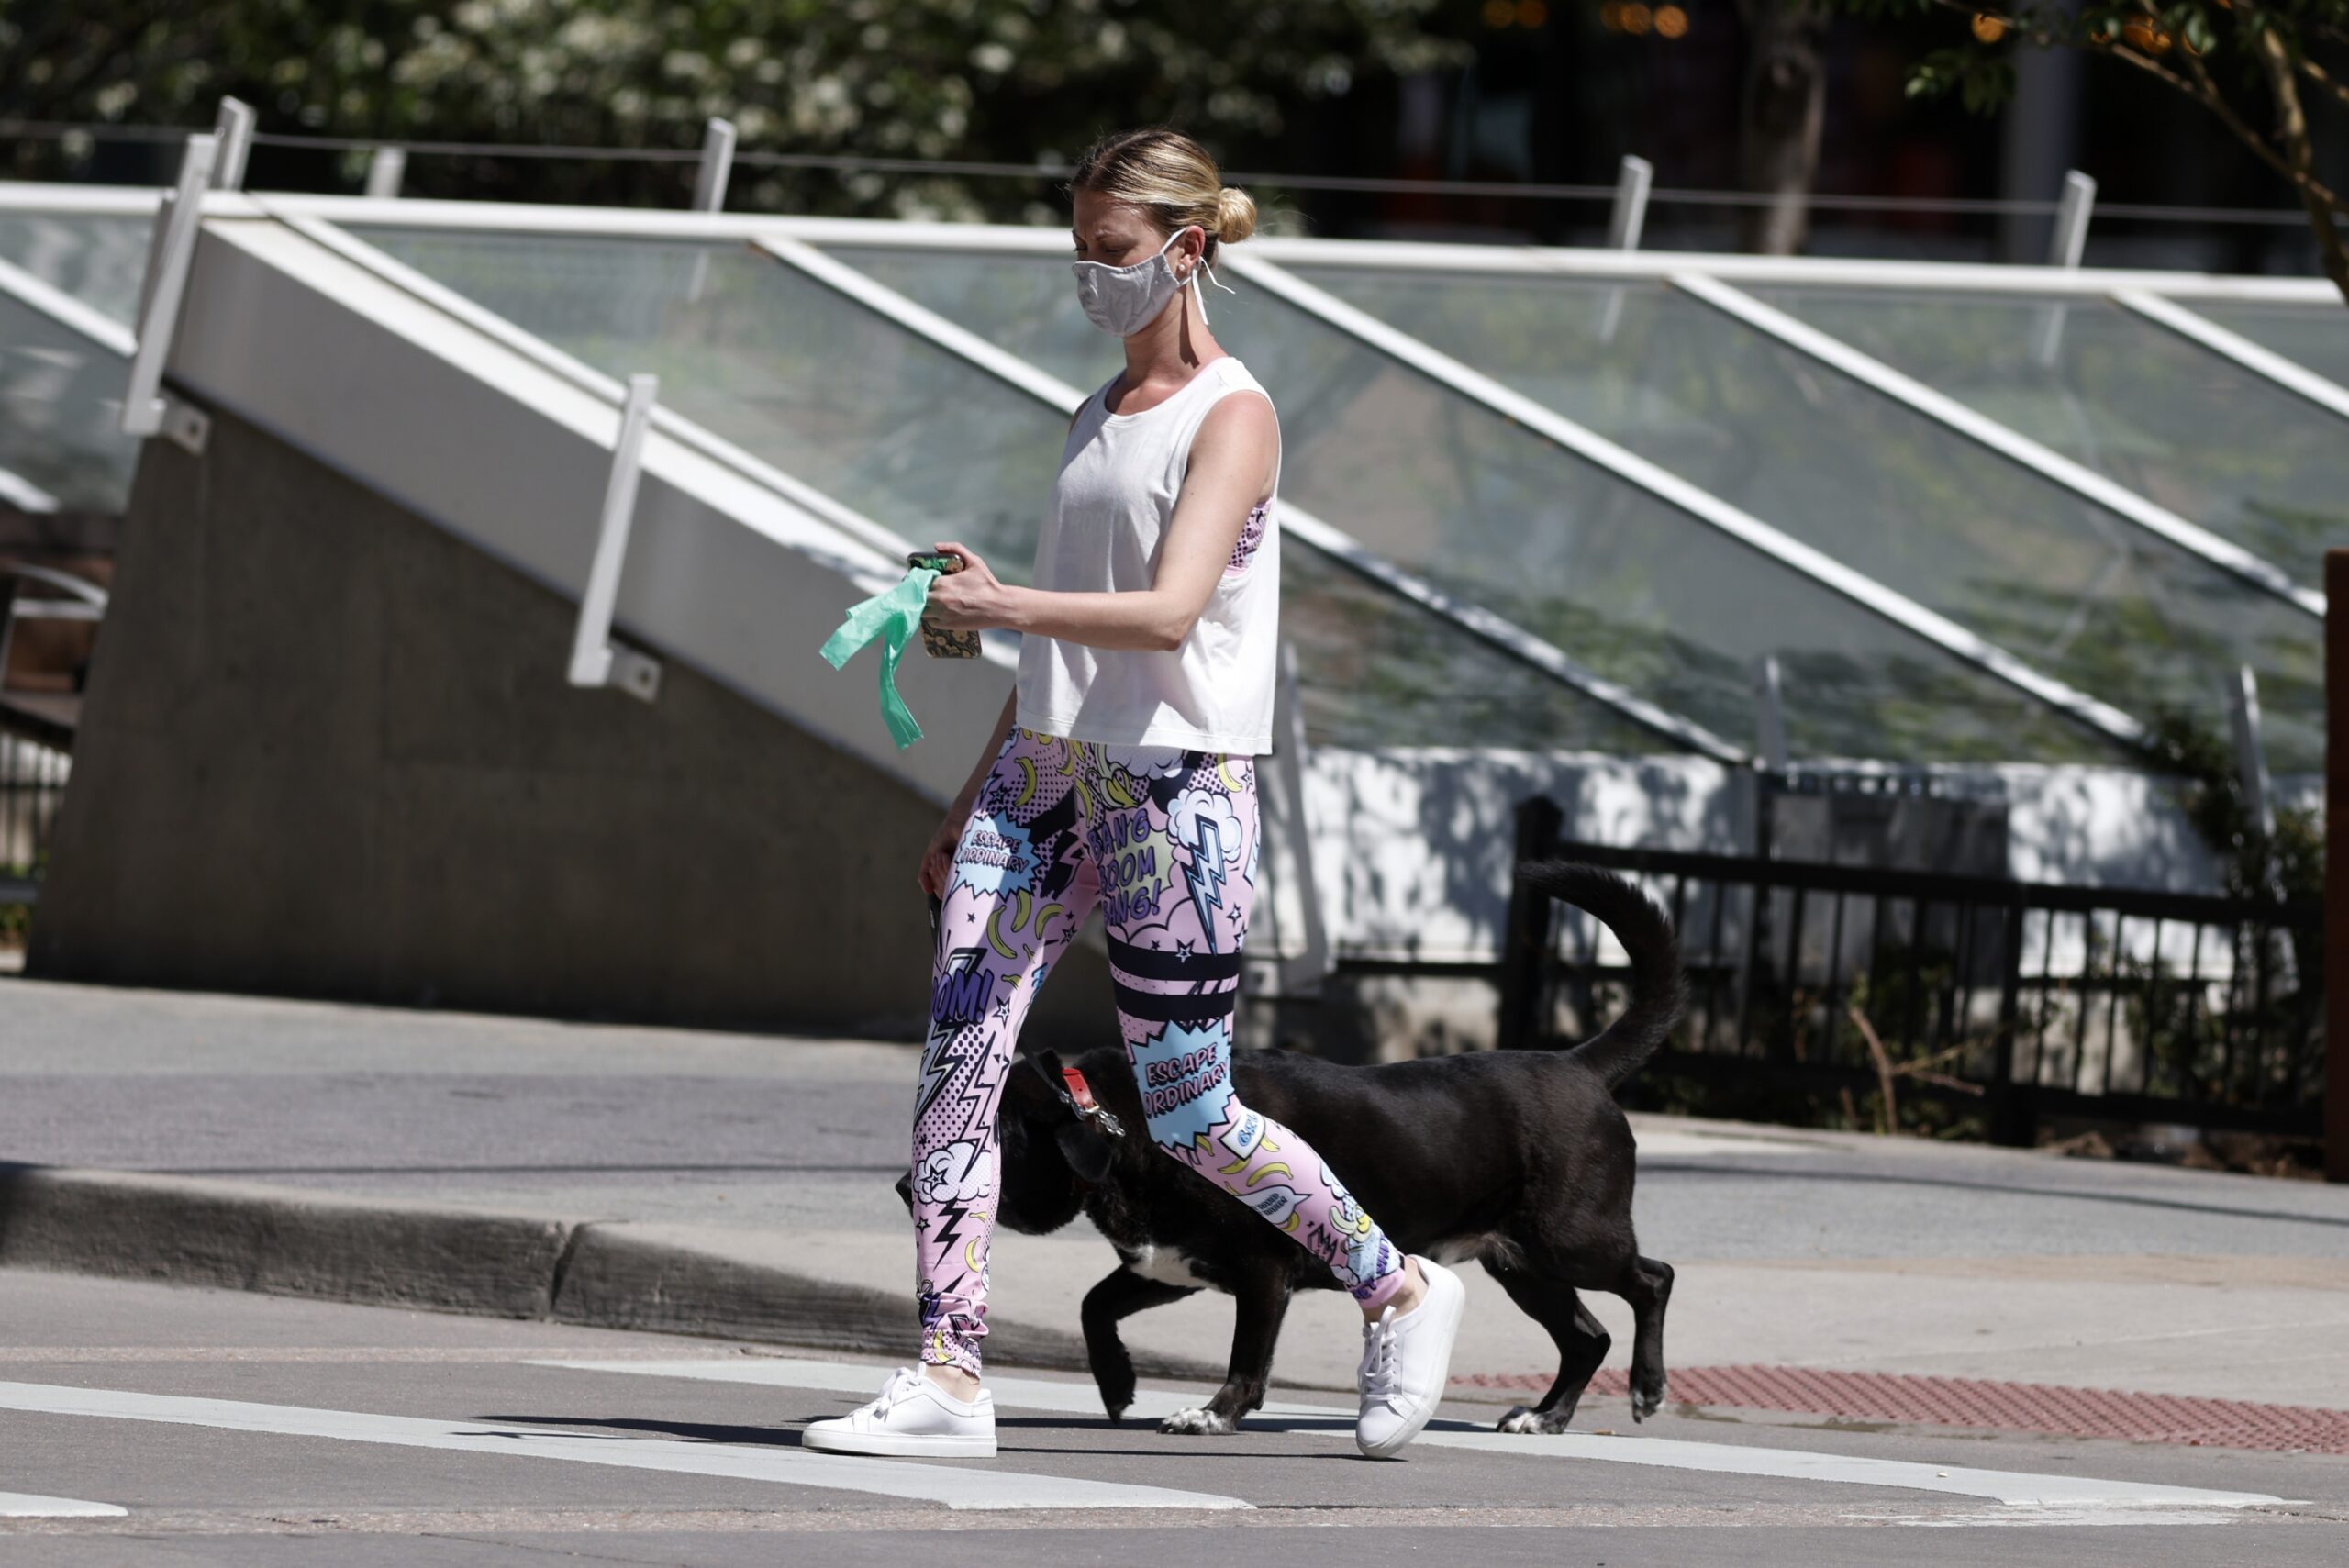 A pedestrian in a face mask leads her dog across across the street